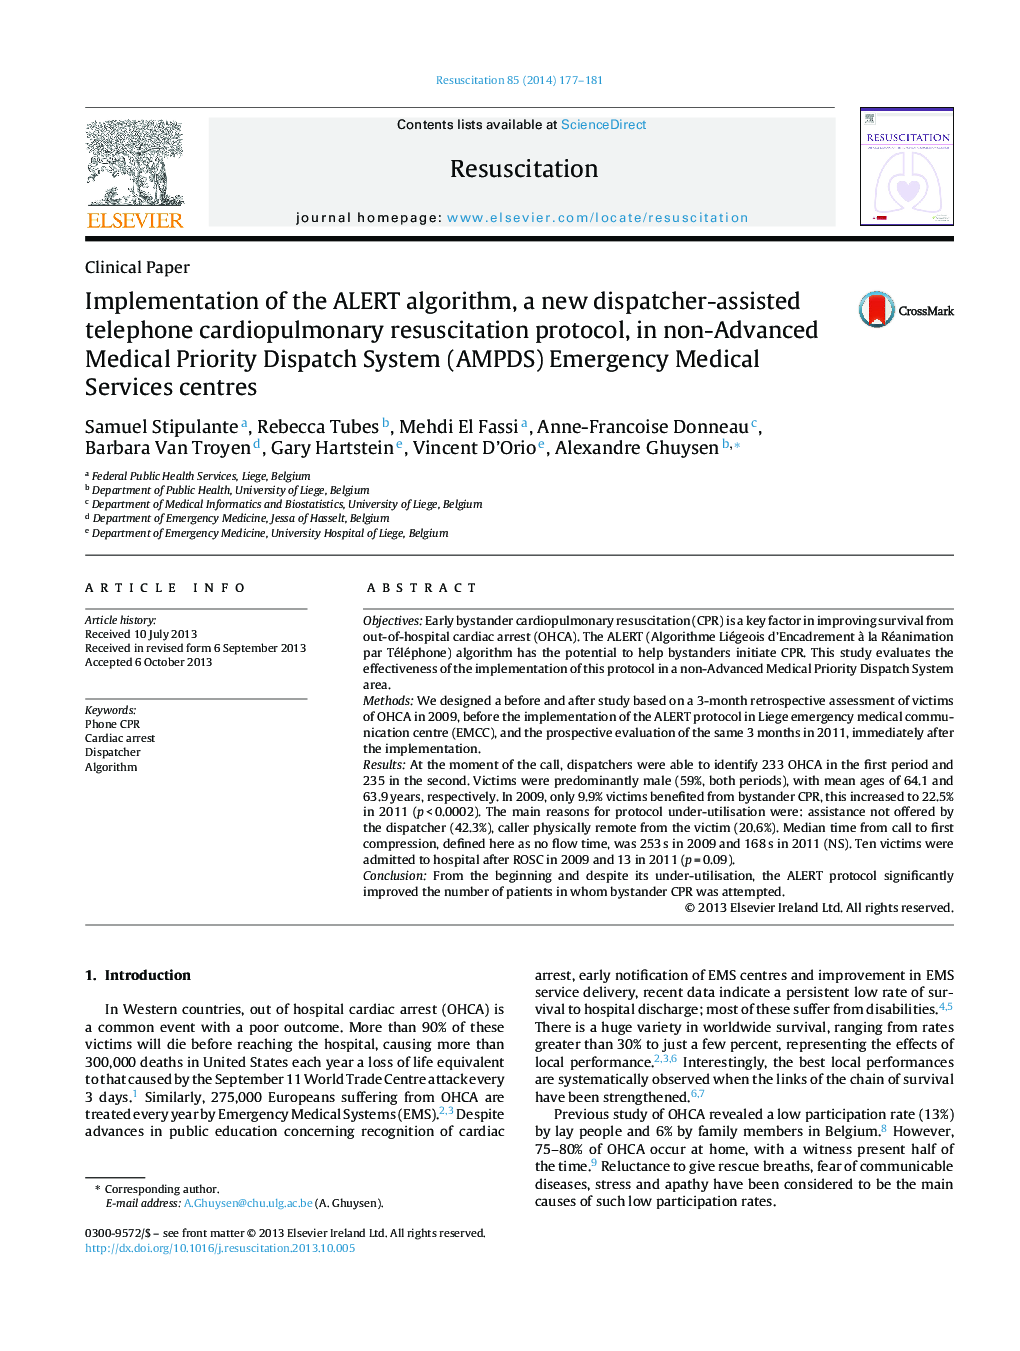 Implementation of the ALERT algorithm, a new dispatcher-assisted telephone cardiopulmonary resuscitation protocol, in non-Advanced Medical Priority Dispatch System (AMPDS) Emergency Medical Services centres